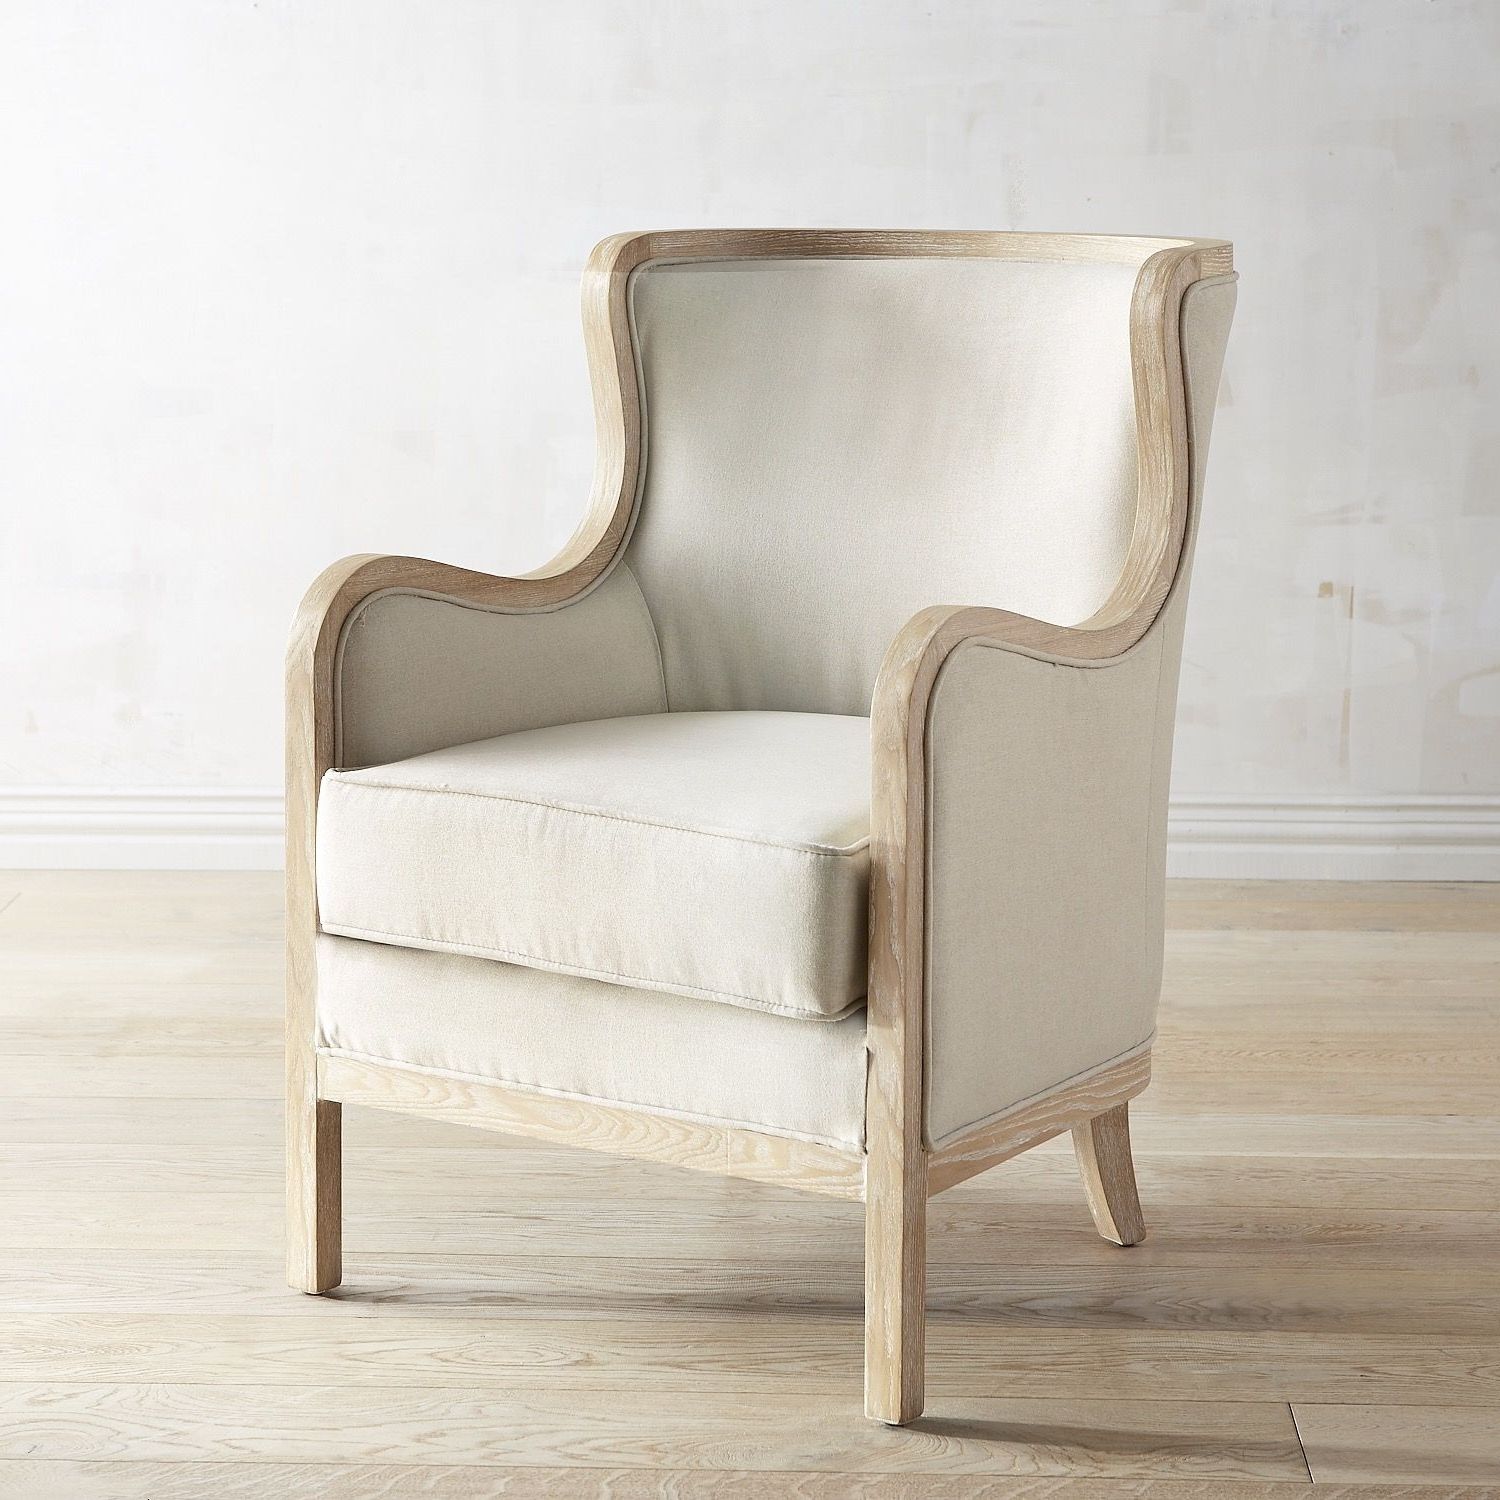 Most Popular Magnolia Home Emery Ivory Burlap Side Chairs In Magnolia Home Fog Bloom Chair (View 5 of 20)